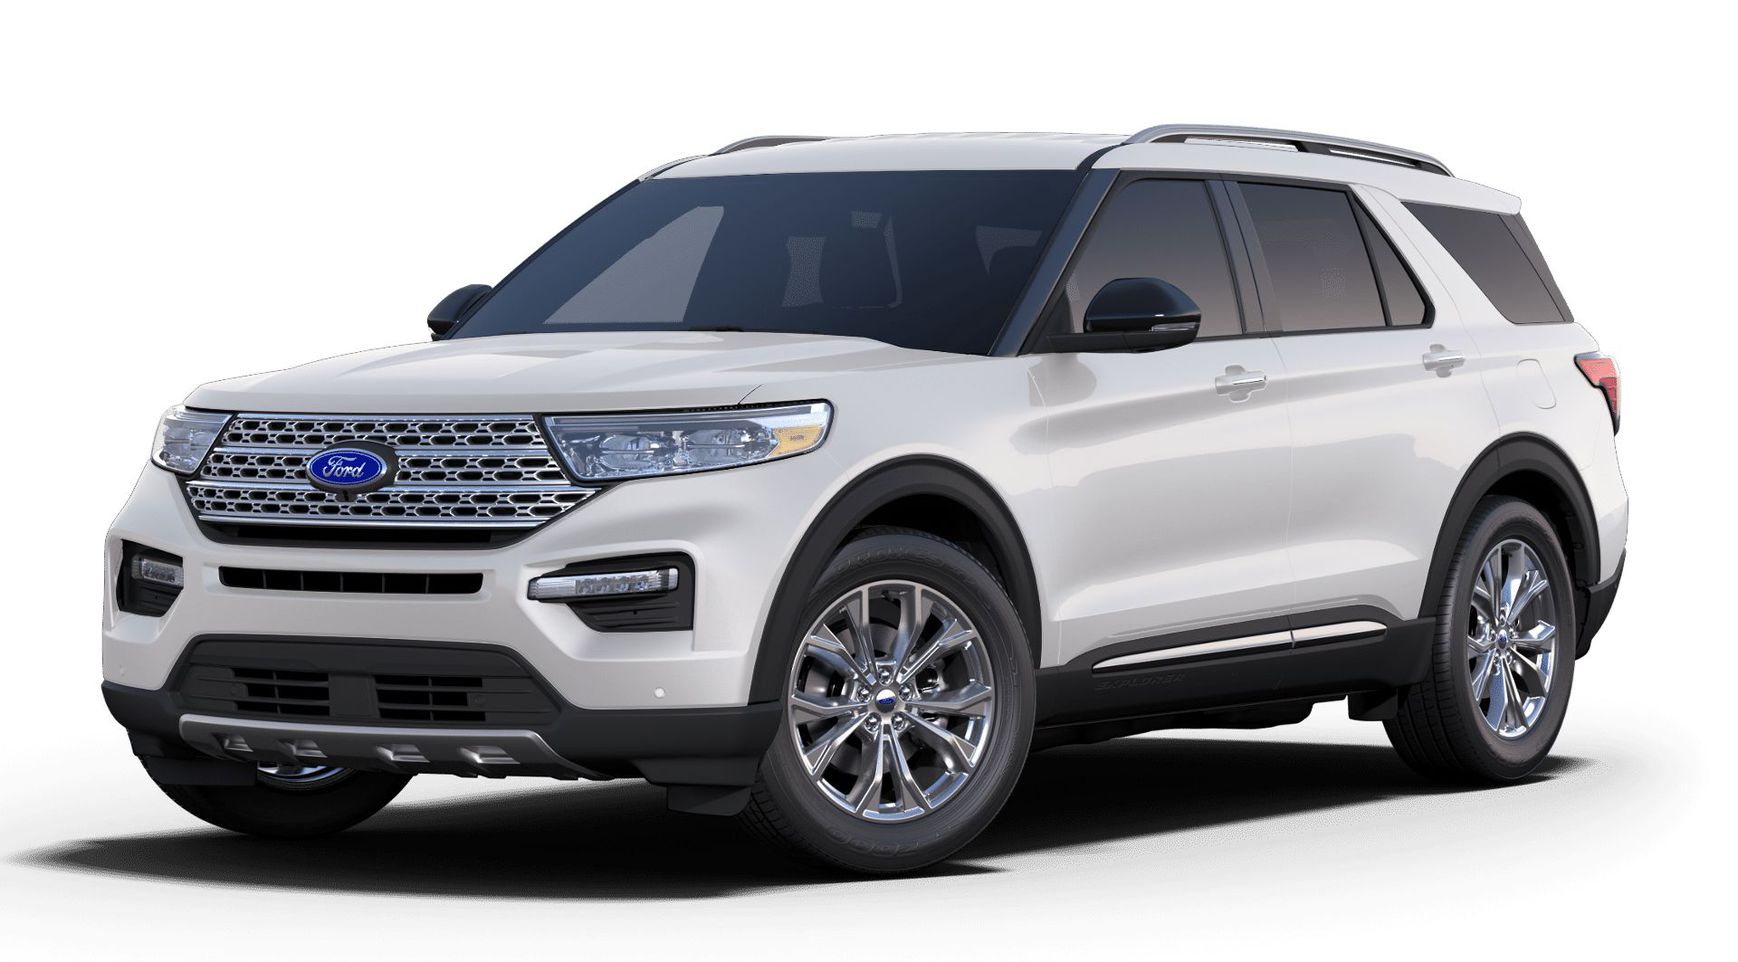   Ford Explorer Limited 2020  23 L4 Ti-VCT EcoBoost    10           